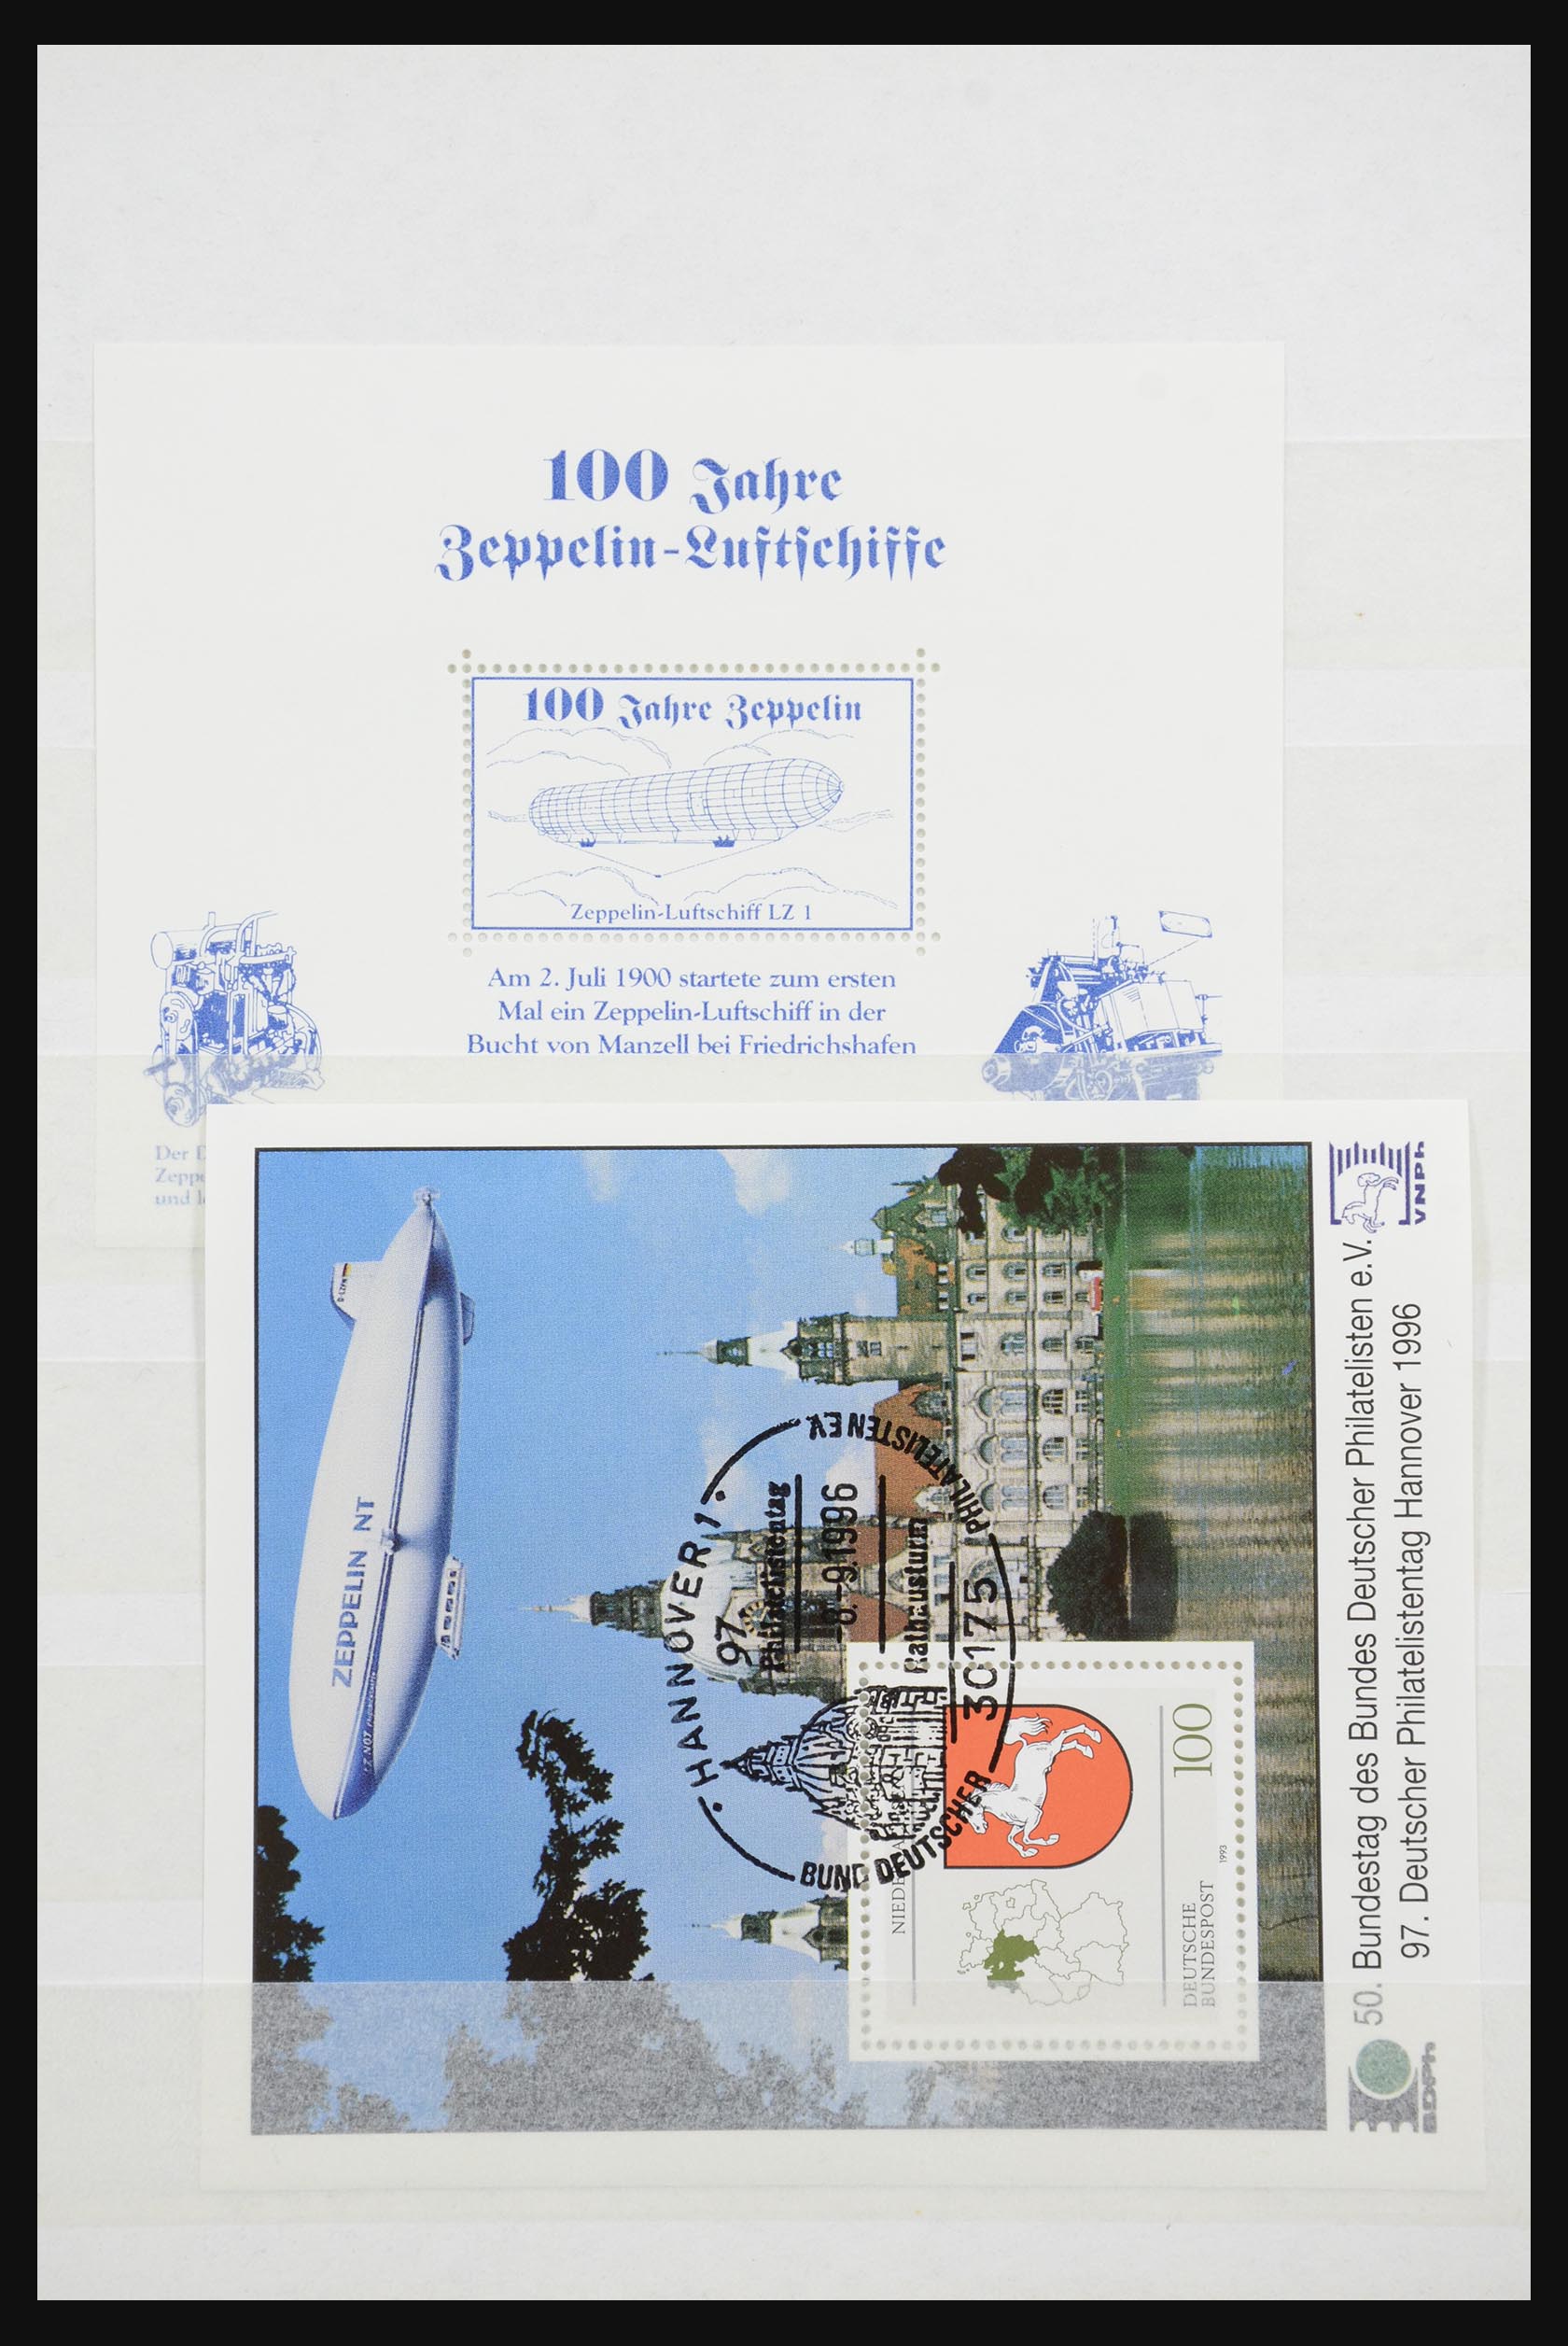 32050 040 - 32050 Bundespost special sheets 1980-2010.